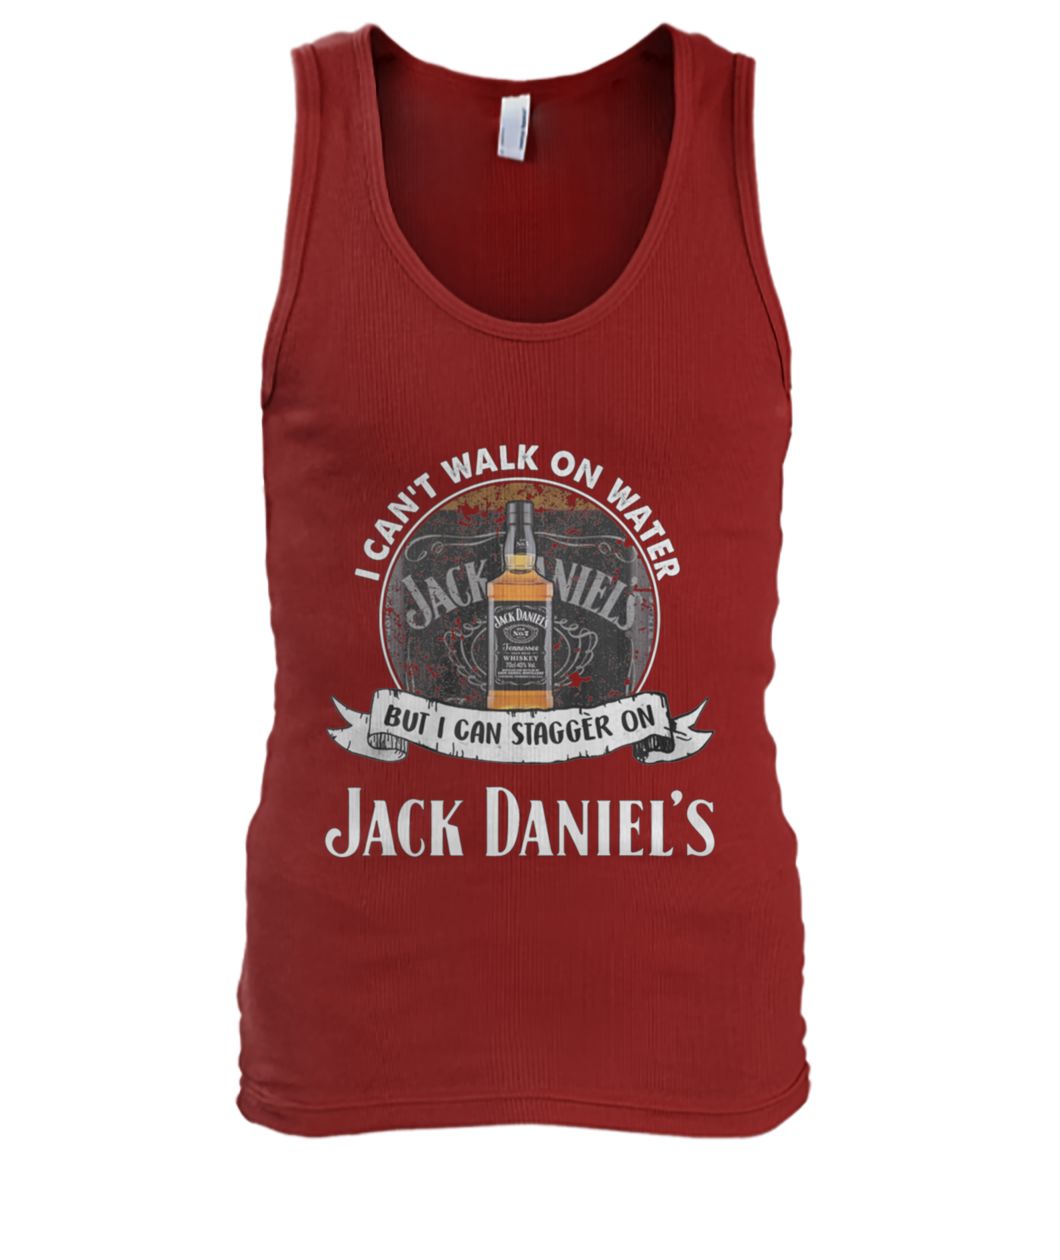 I can't walk on water but I can stagger on jack daniel's men's tank top